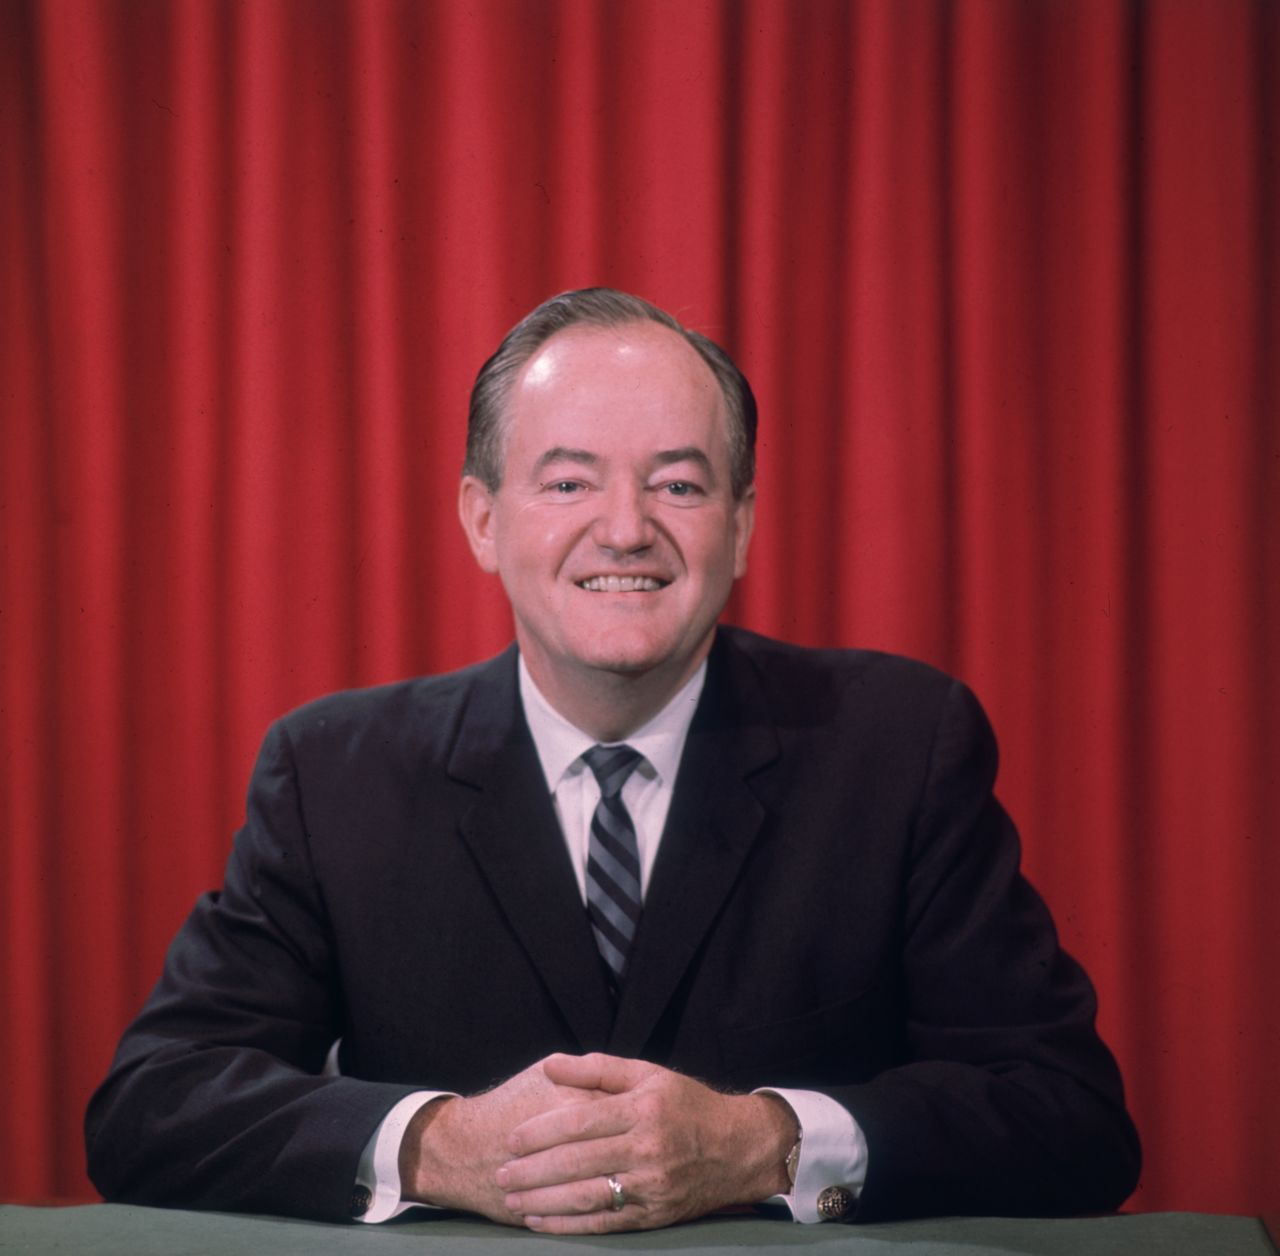 Then-Vice President Hubert Humphrey lost his birth state of South Dakota in a losing campaign against Republican nominee Richard Nixon in 1968. Humphrey won both his home state of Minnesota and Nixon's home state of New York.